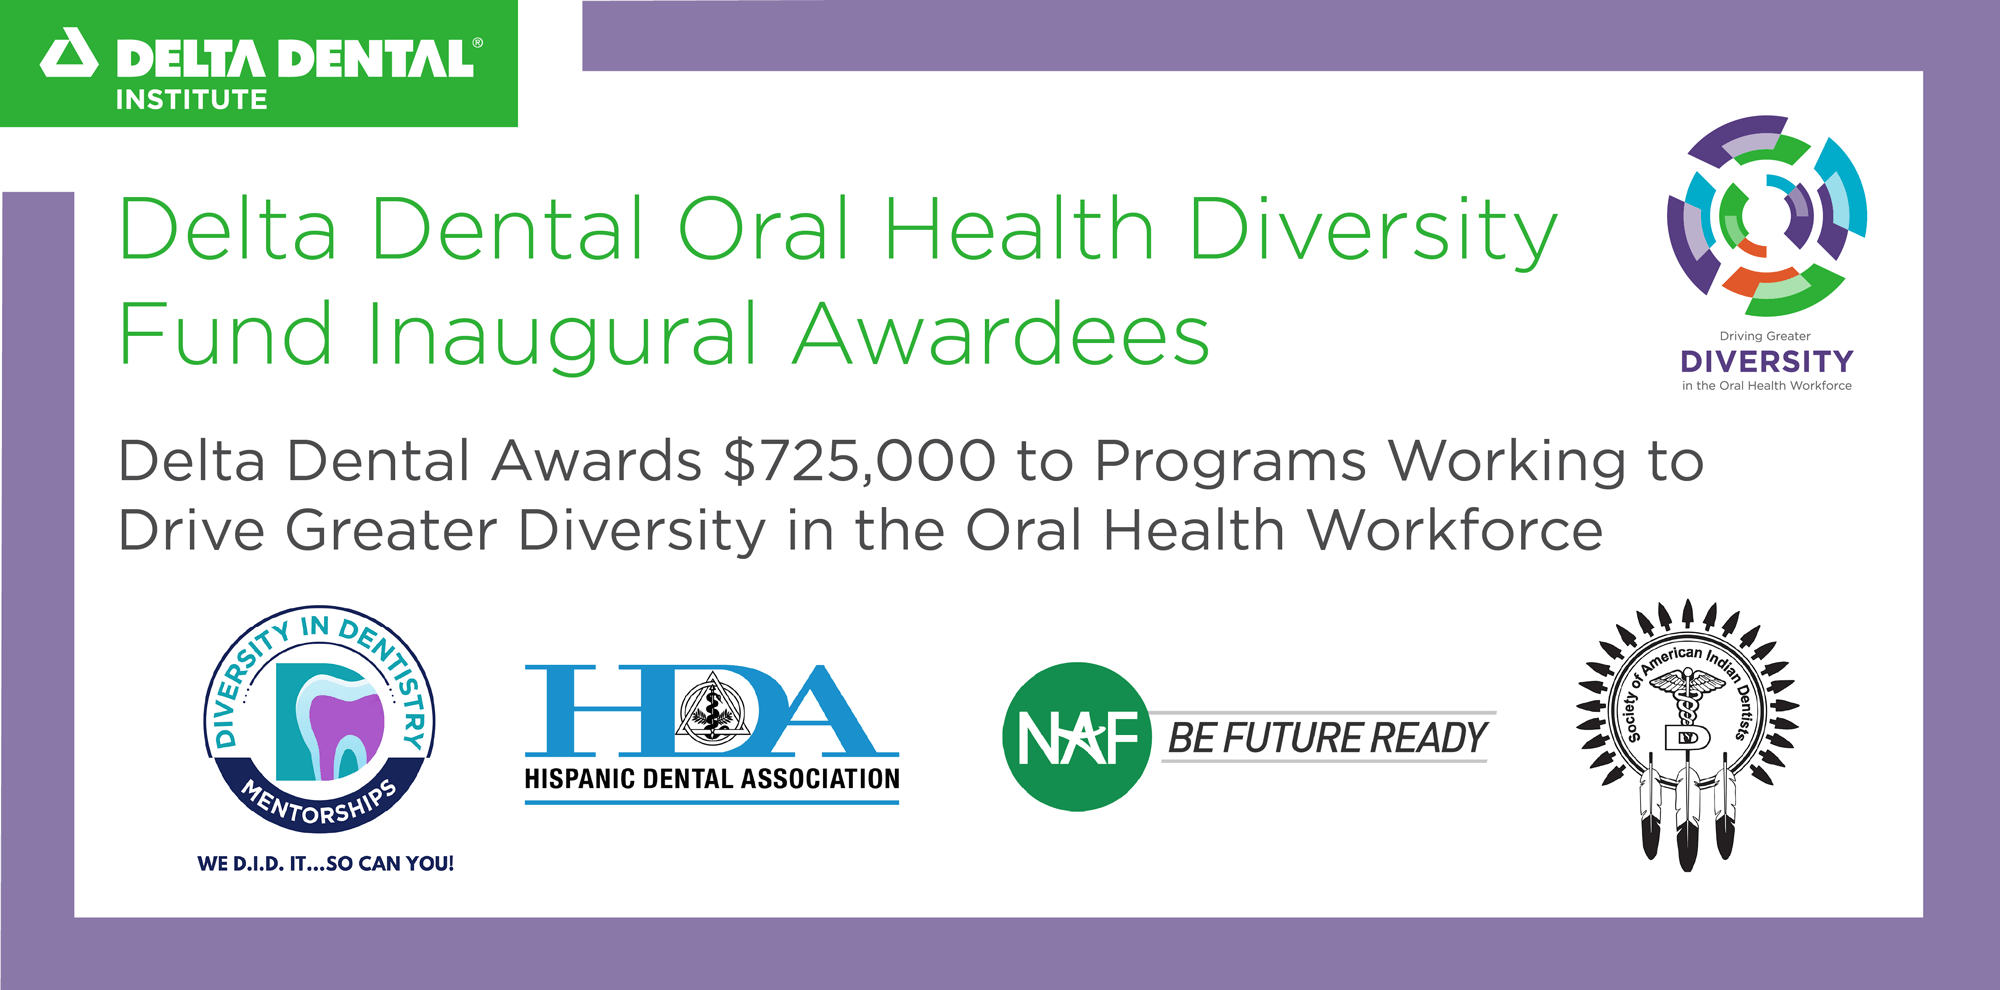 Delat Dental oral health diversity fund inagural awardees. Delta dental awards $725,000 to programs working to drive greater diversity in the oral health workforce. Society of American Indian Dentists logo, NAF Be Future Ready logo, Hispanic Dental Association logo, Diversity in Dentistry Mentorships We DID it so can you logo